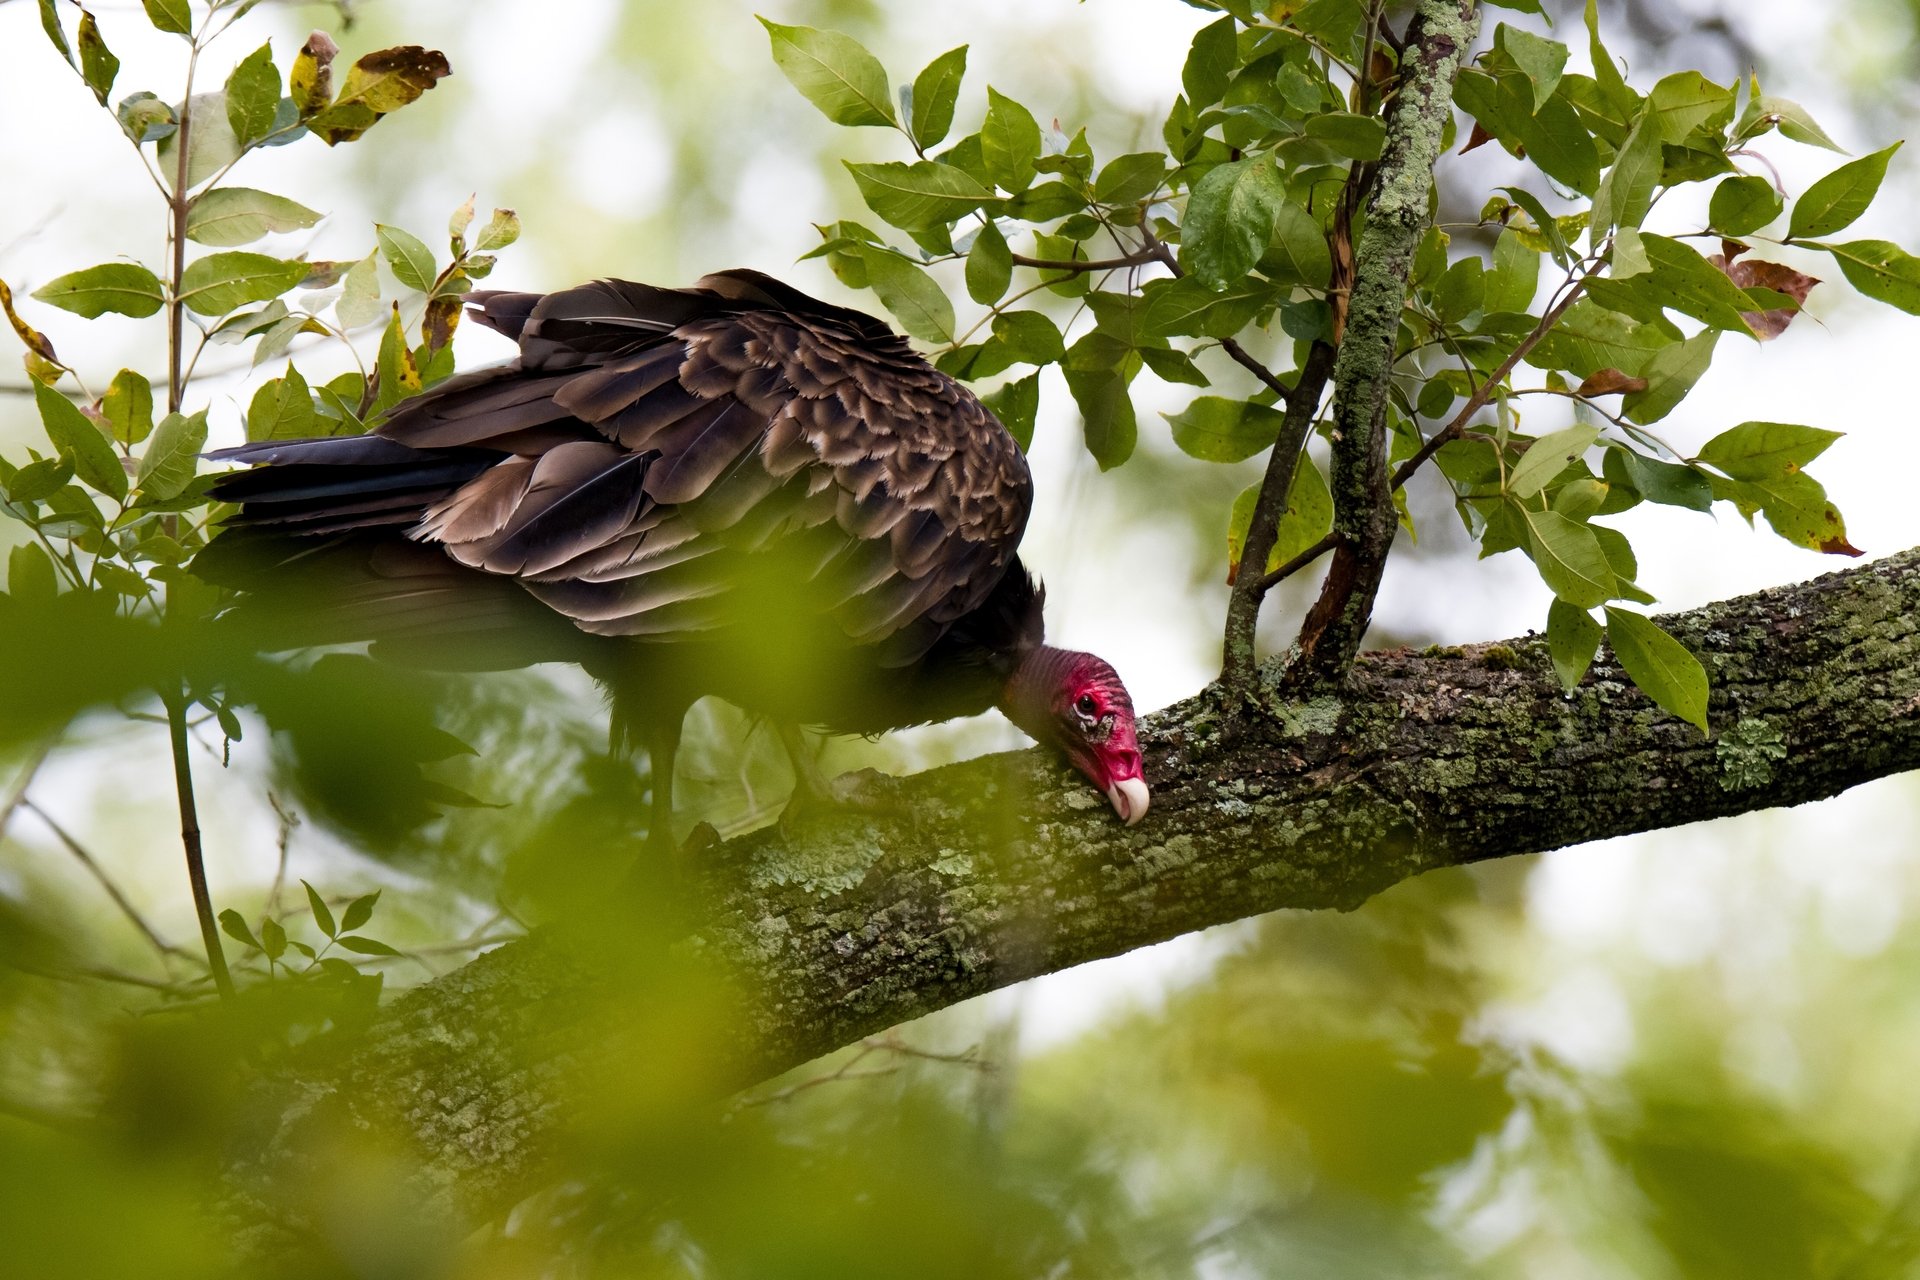 Turkey Vulture perched on branch surrounded by greenery